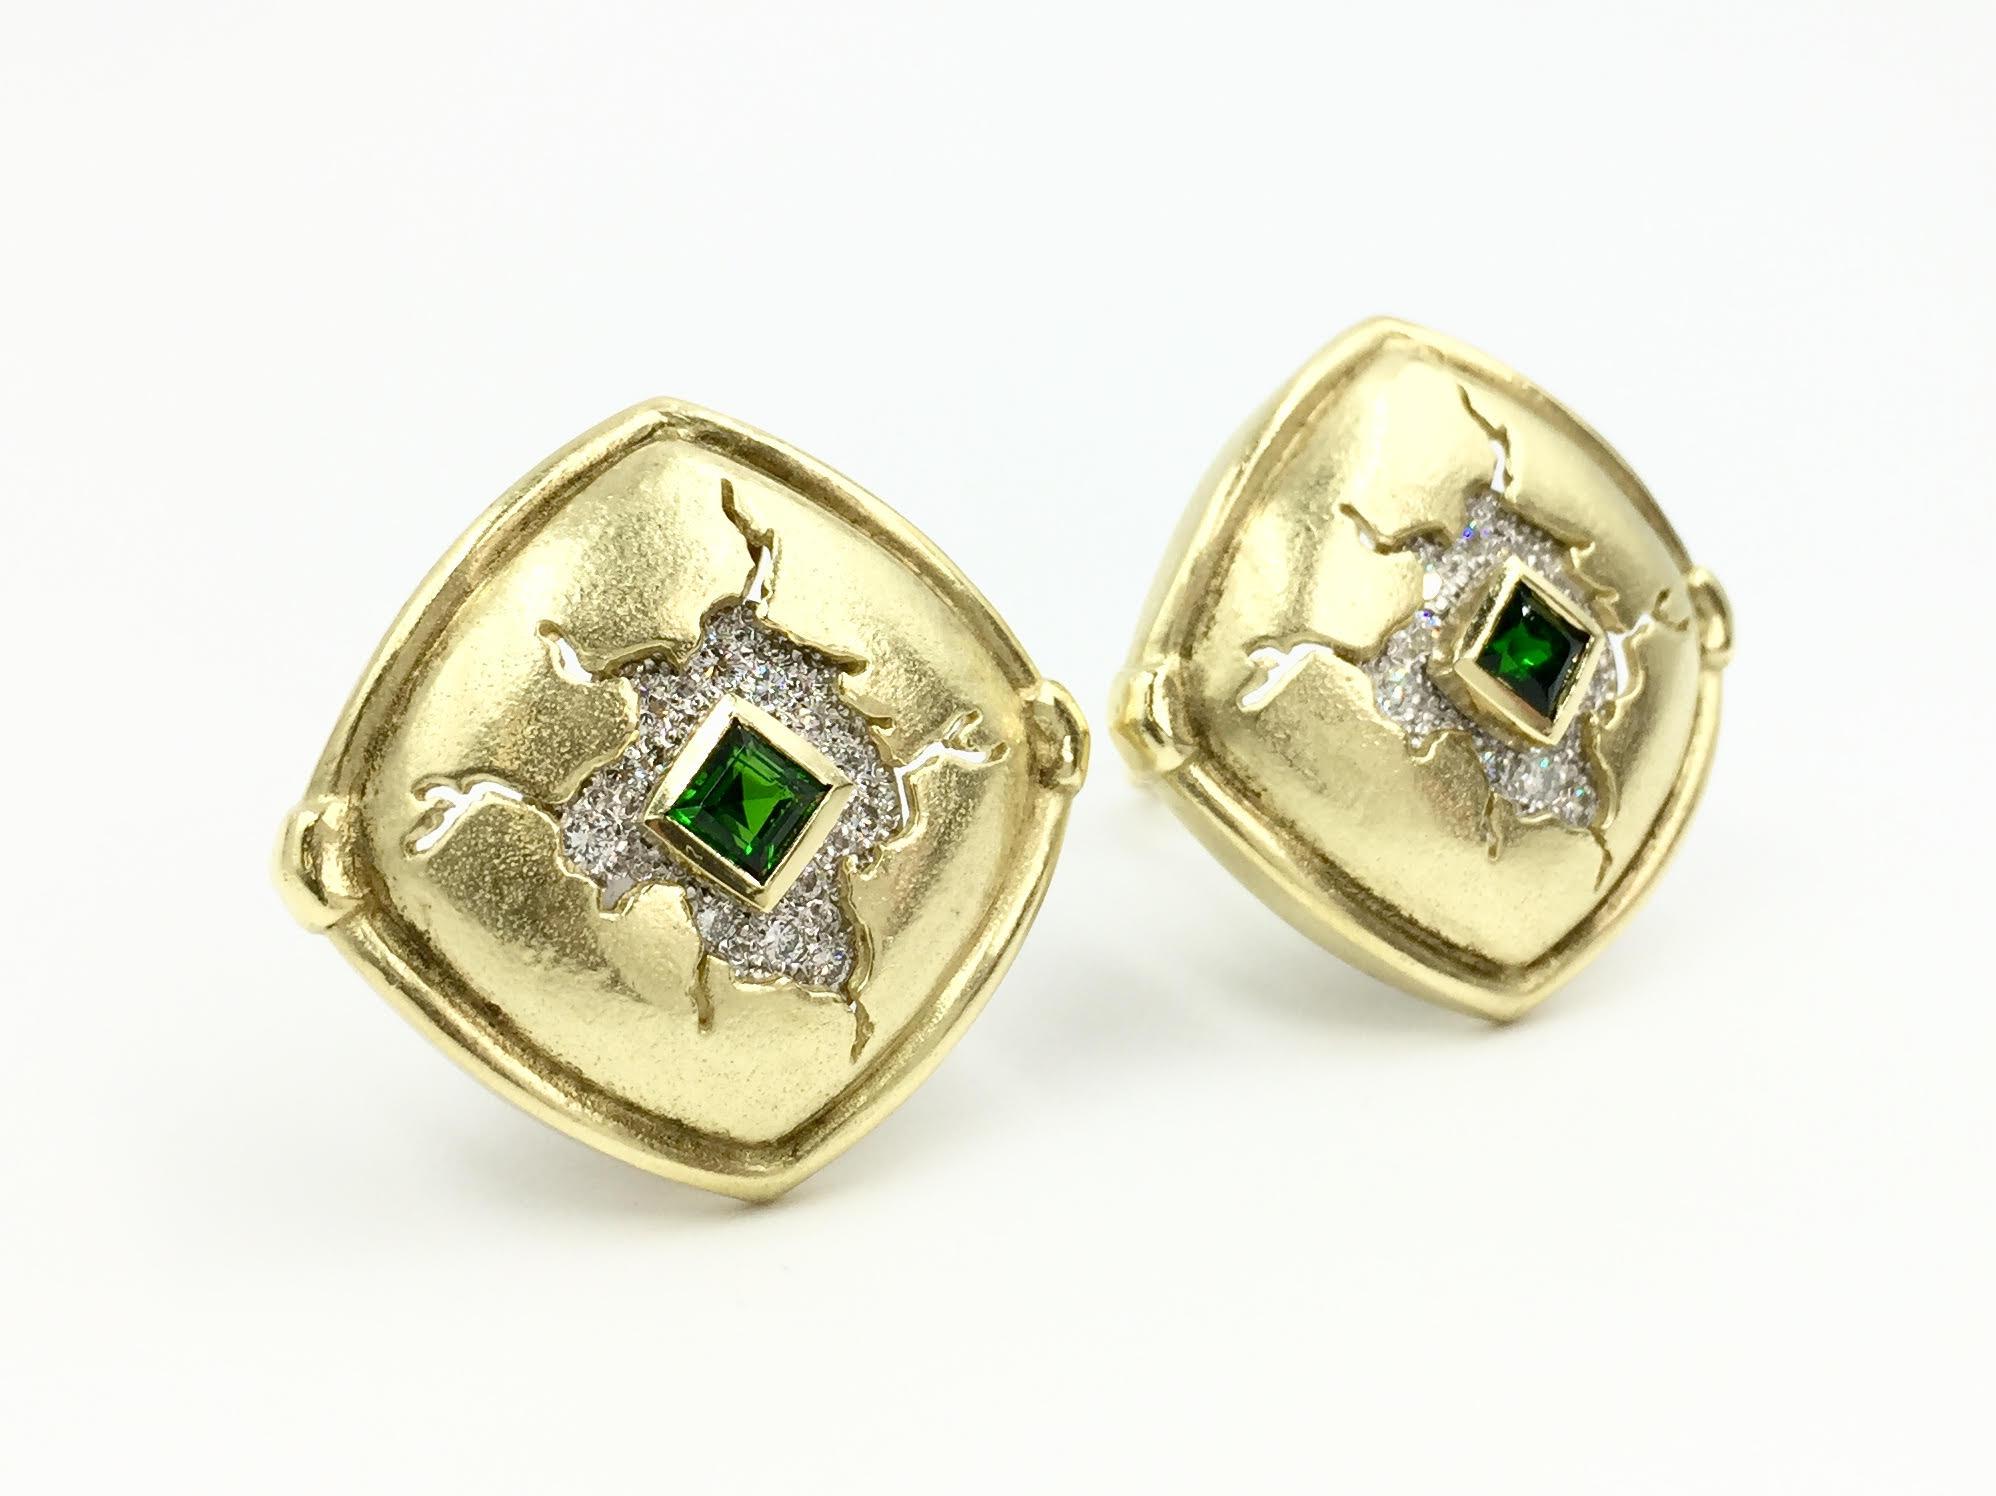 Gorgeous 18 karat satin finished yellow gold and platinum diamond and chrome green tourmaline large button style earrings by Seidengang. .64 Carats of high quality diamonds are expertly pavé set in platinum surrounding the princess cut vivid chrome